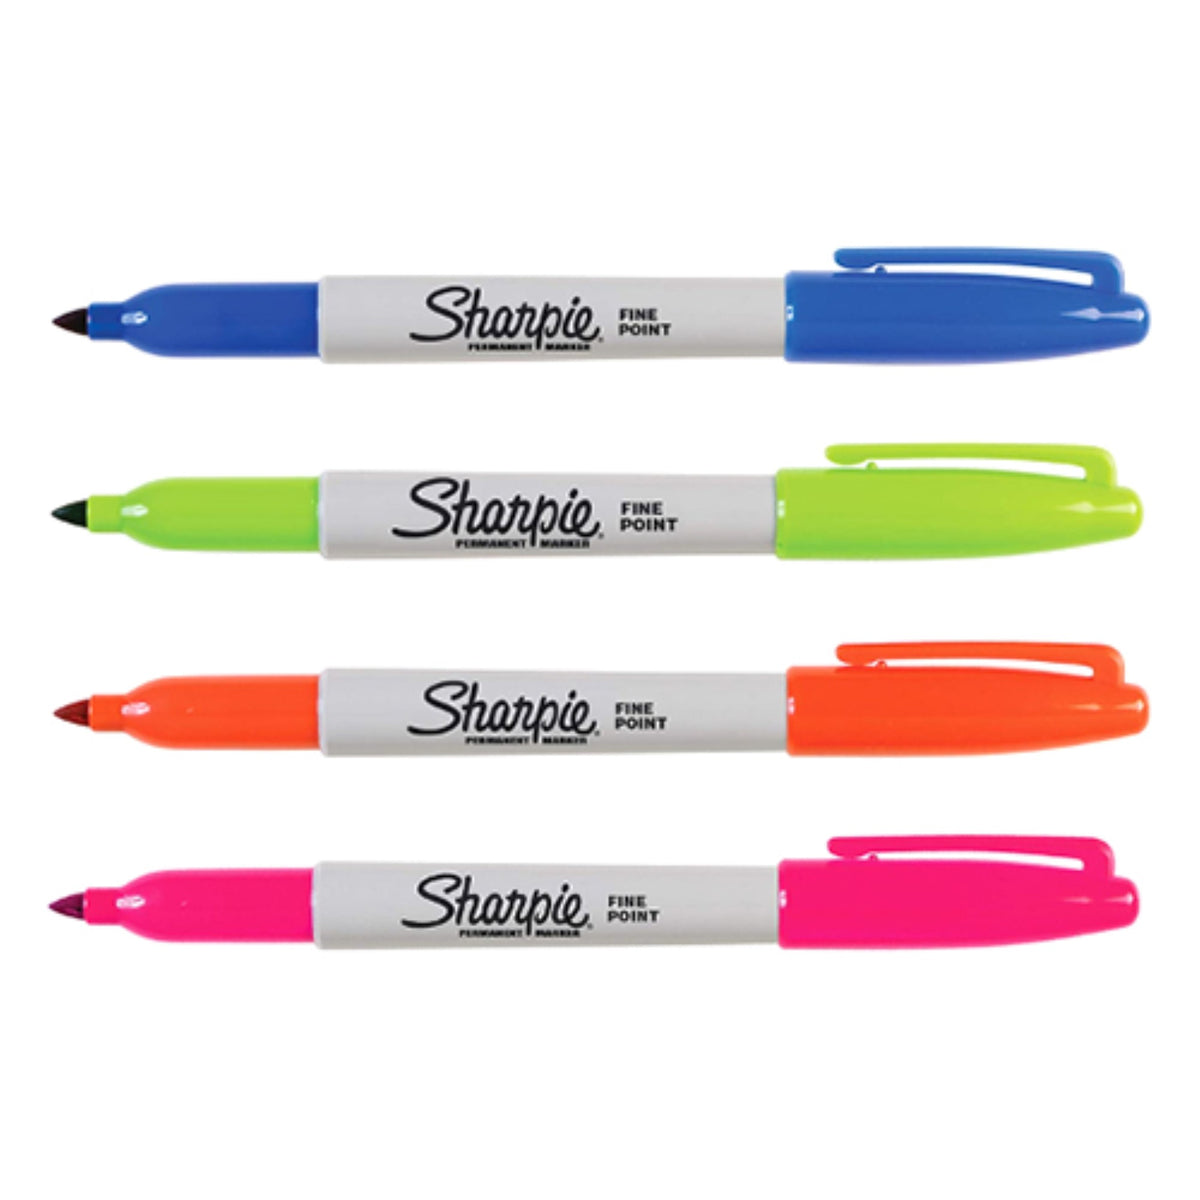 Sharpie Fine Point Permanent Markers Set of 4